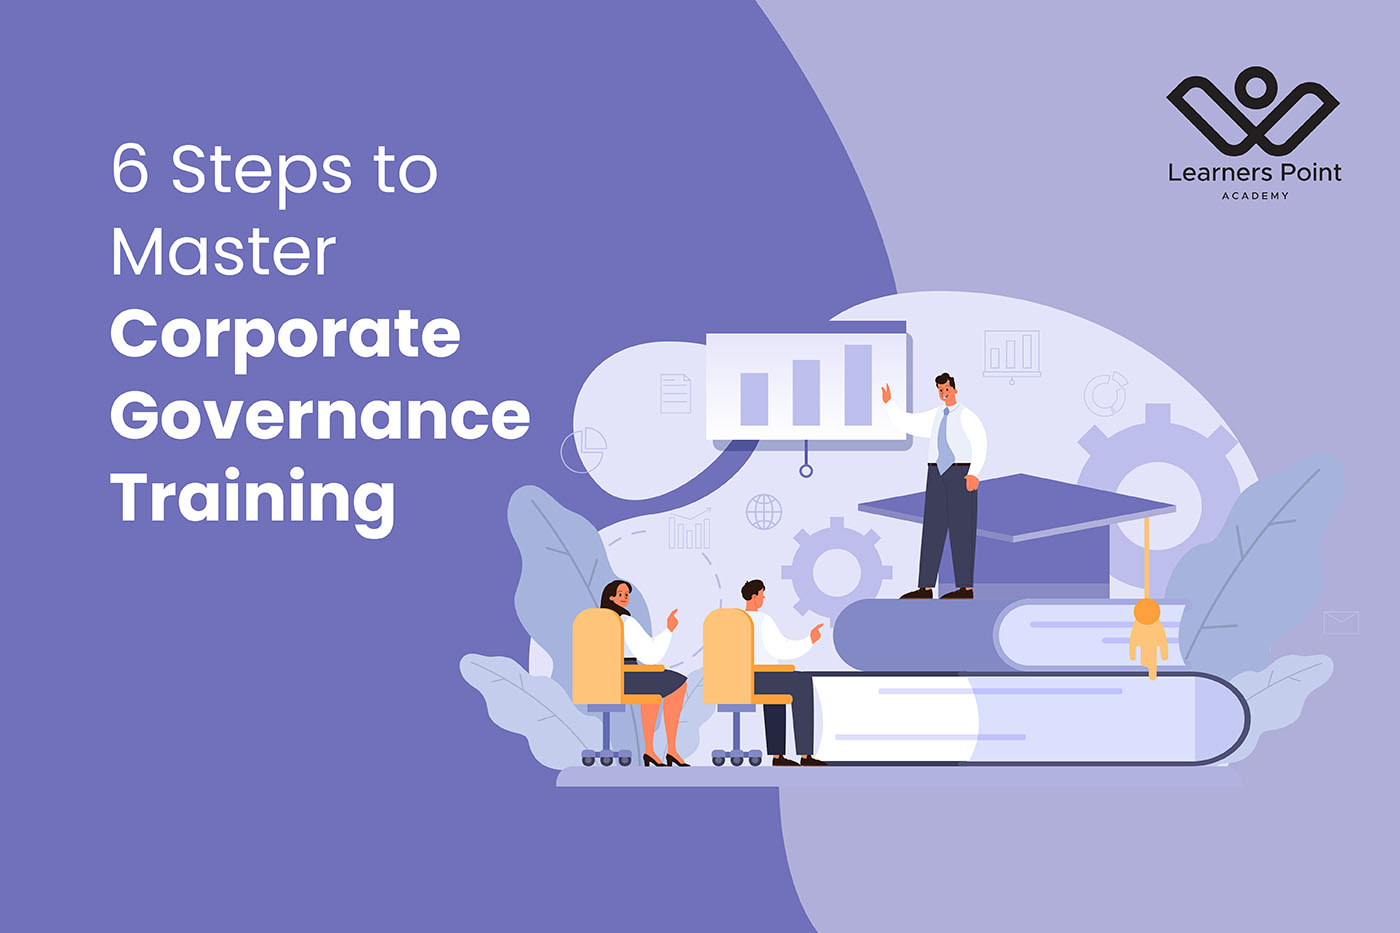 6 Steps to Master Corporate Governance Training